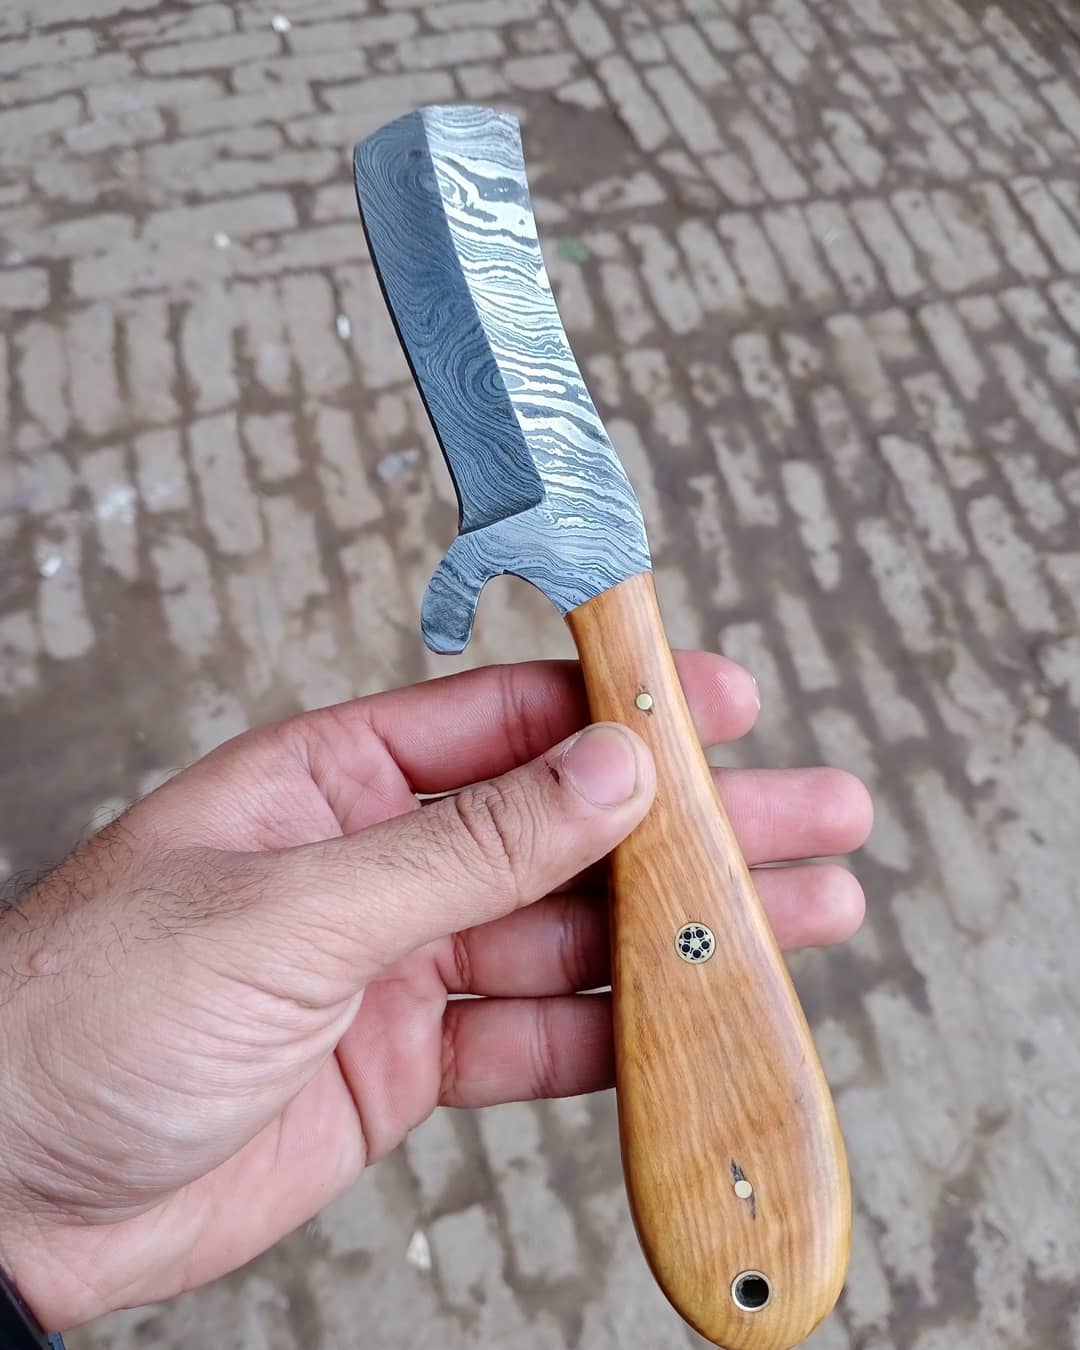 Damascus skinner knife with wood on handle.